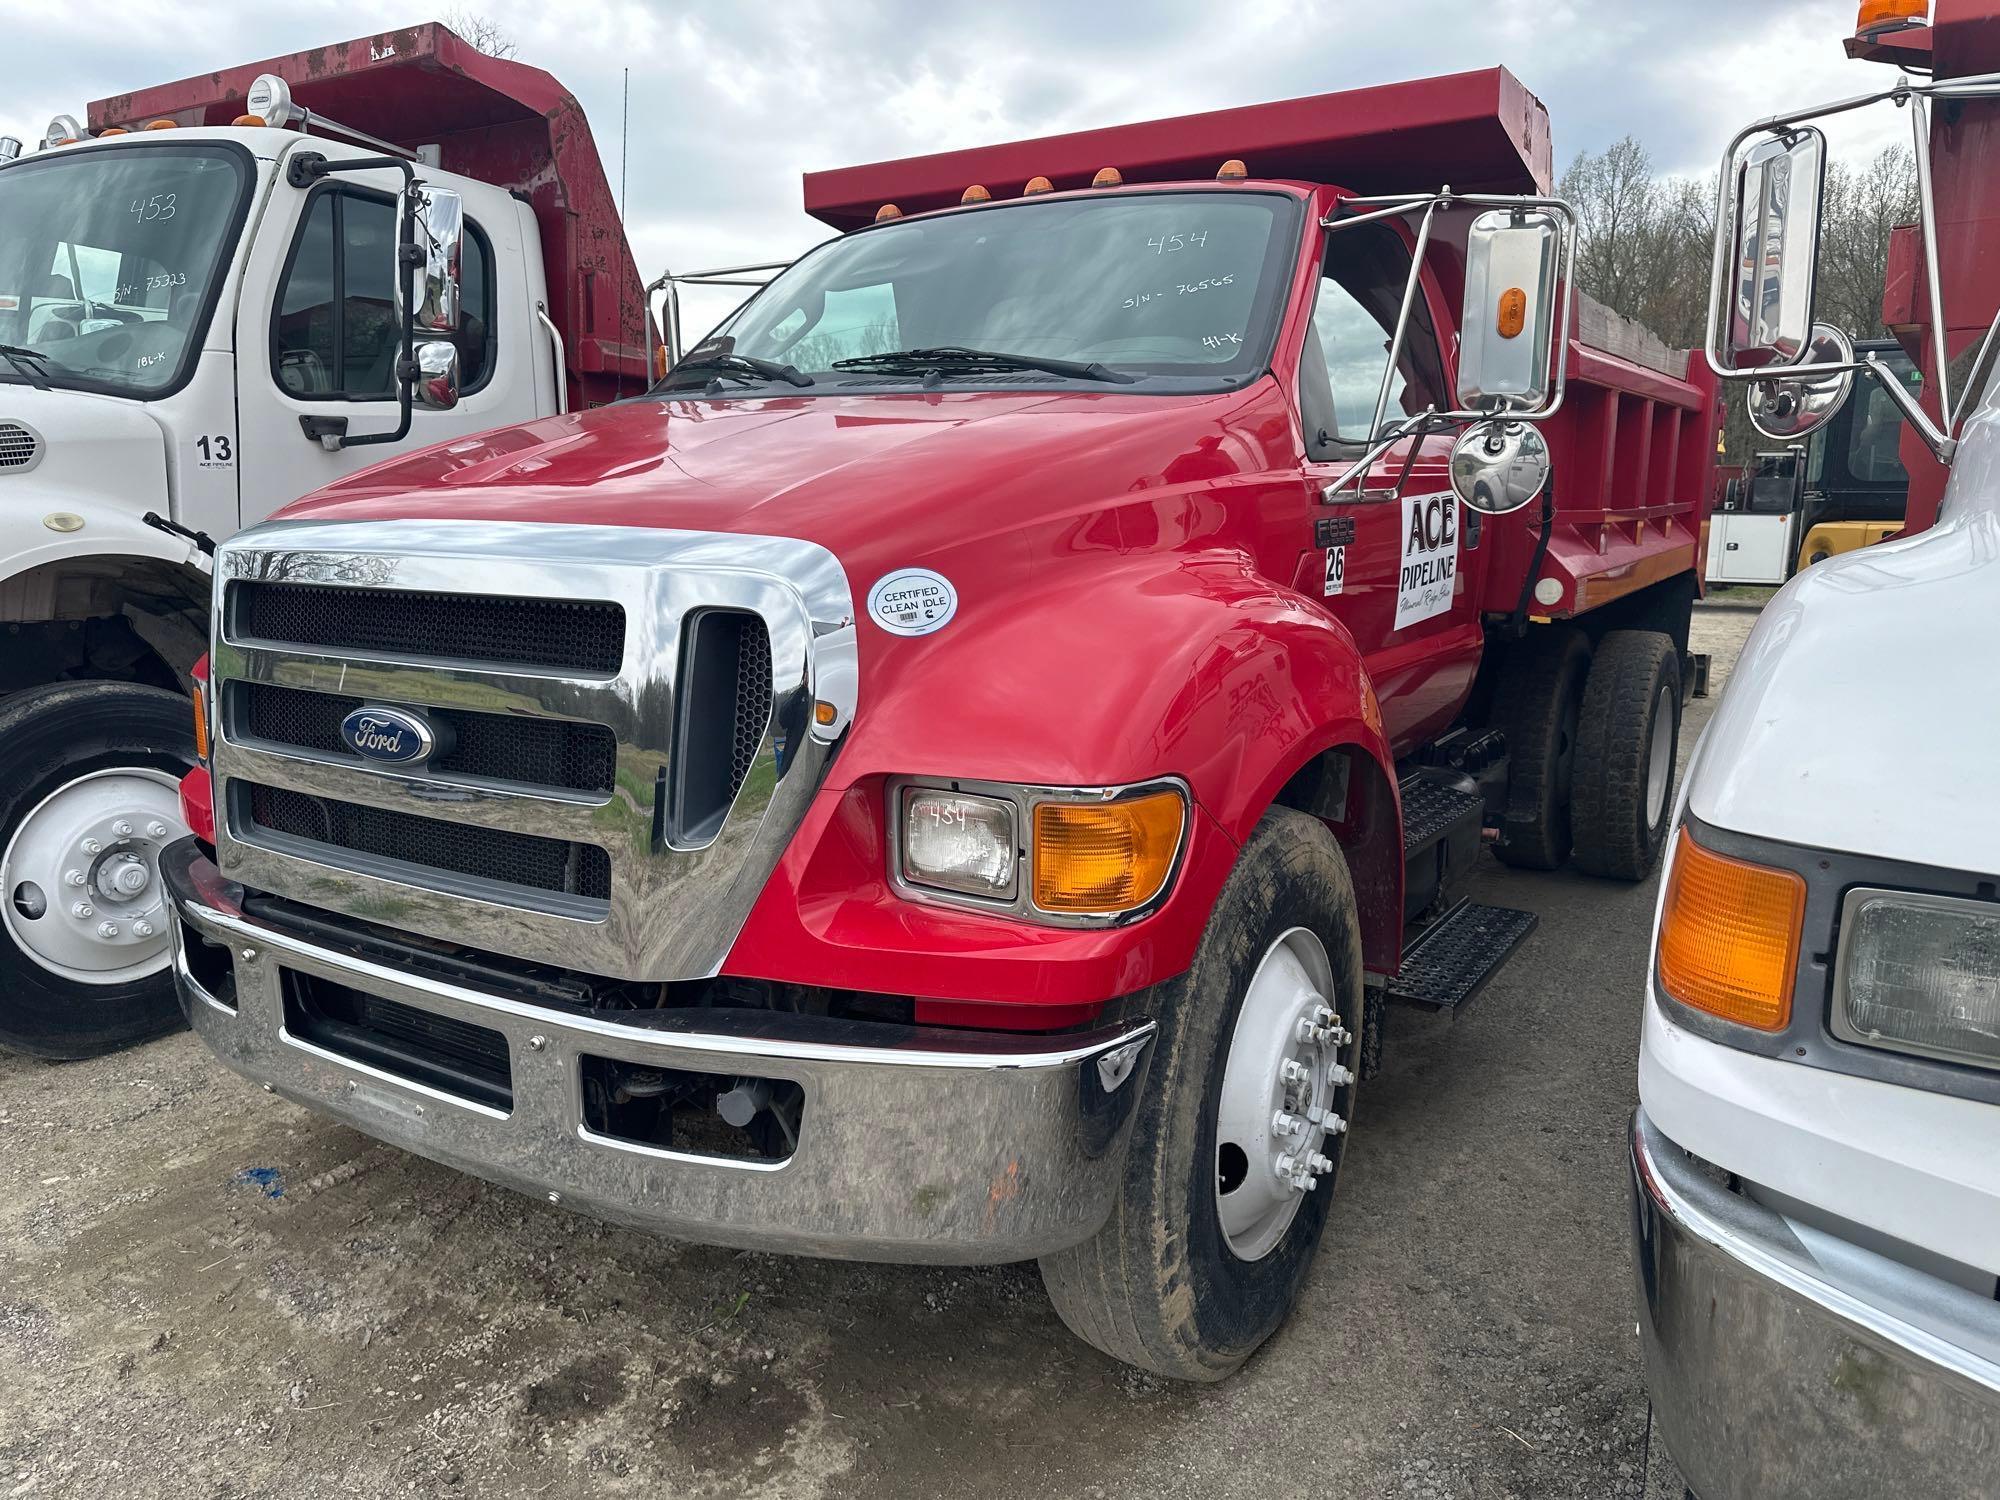 2011 FORD F650XL DUMP TRUCK VN:3FRNF6FC0BV076565 powered by Cummins diesel engine, equipped with